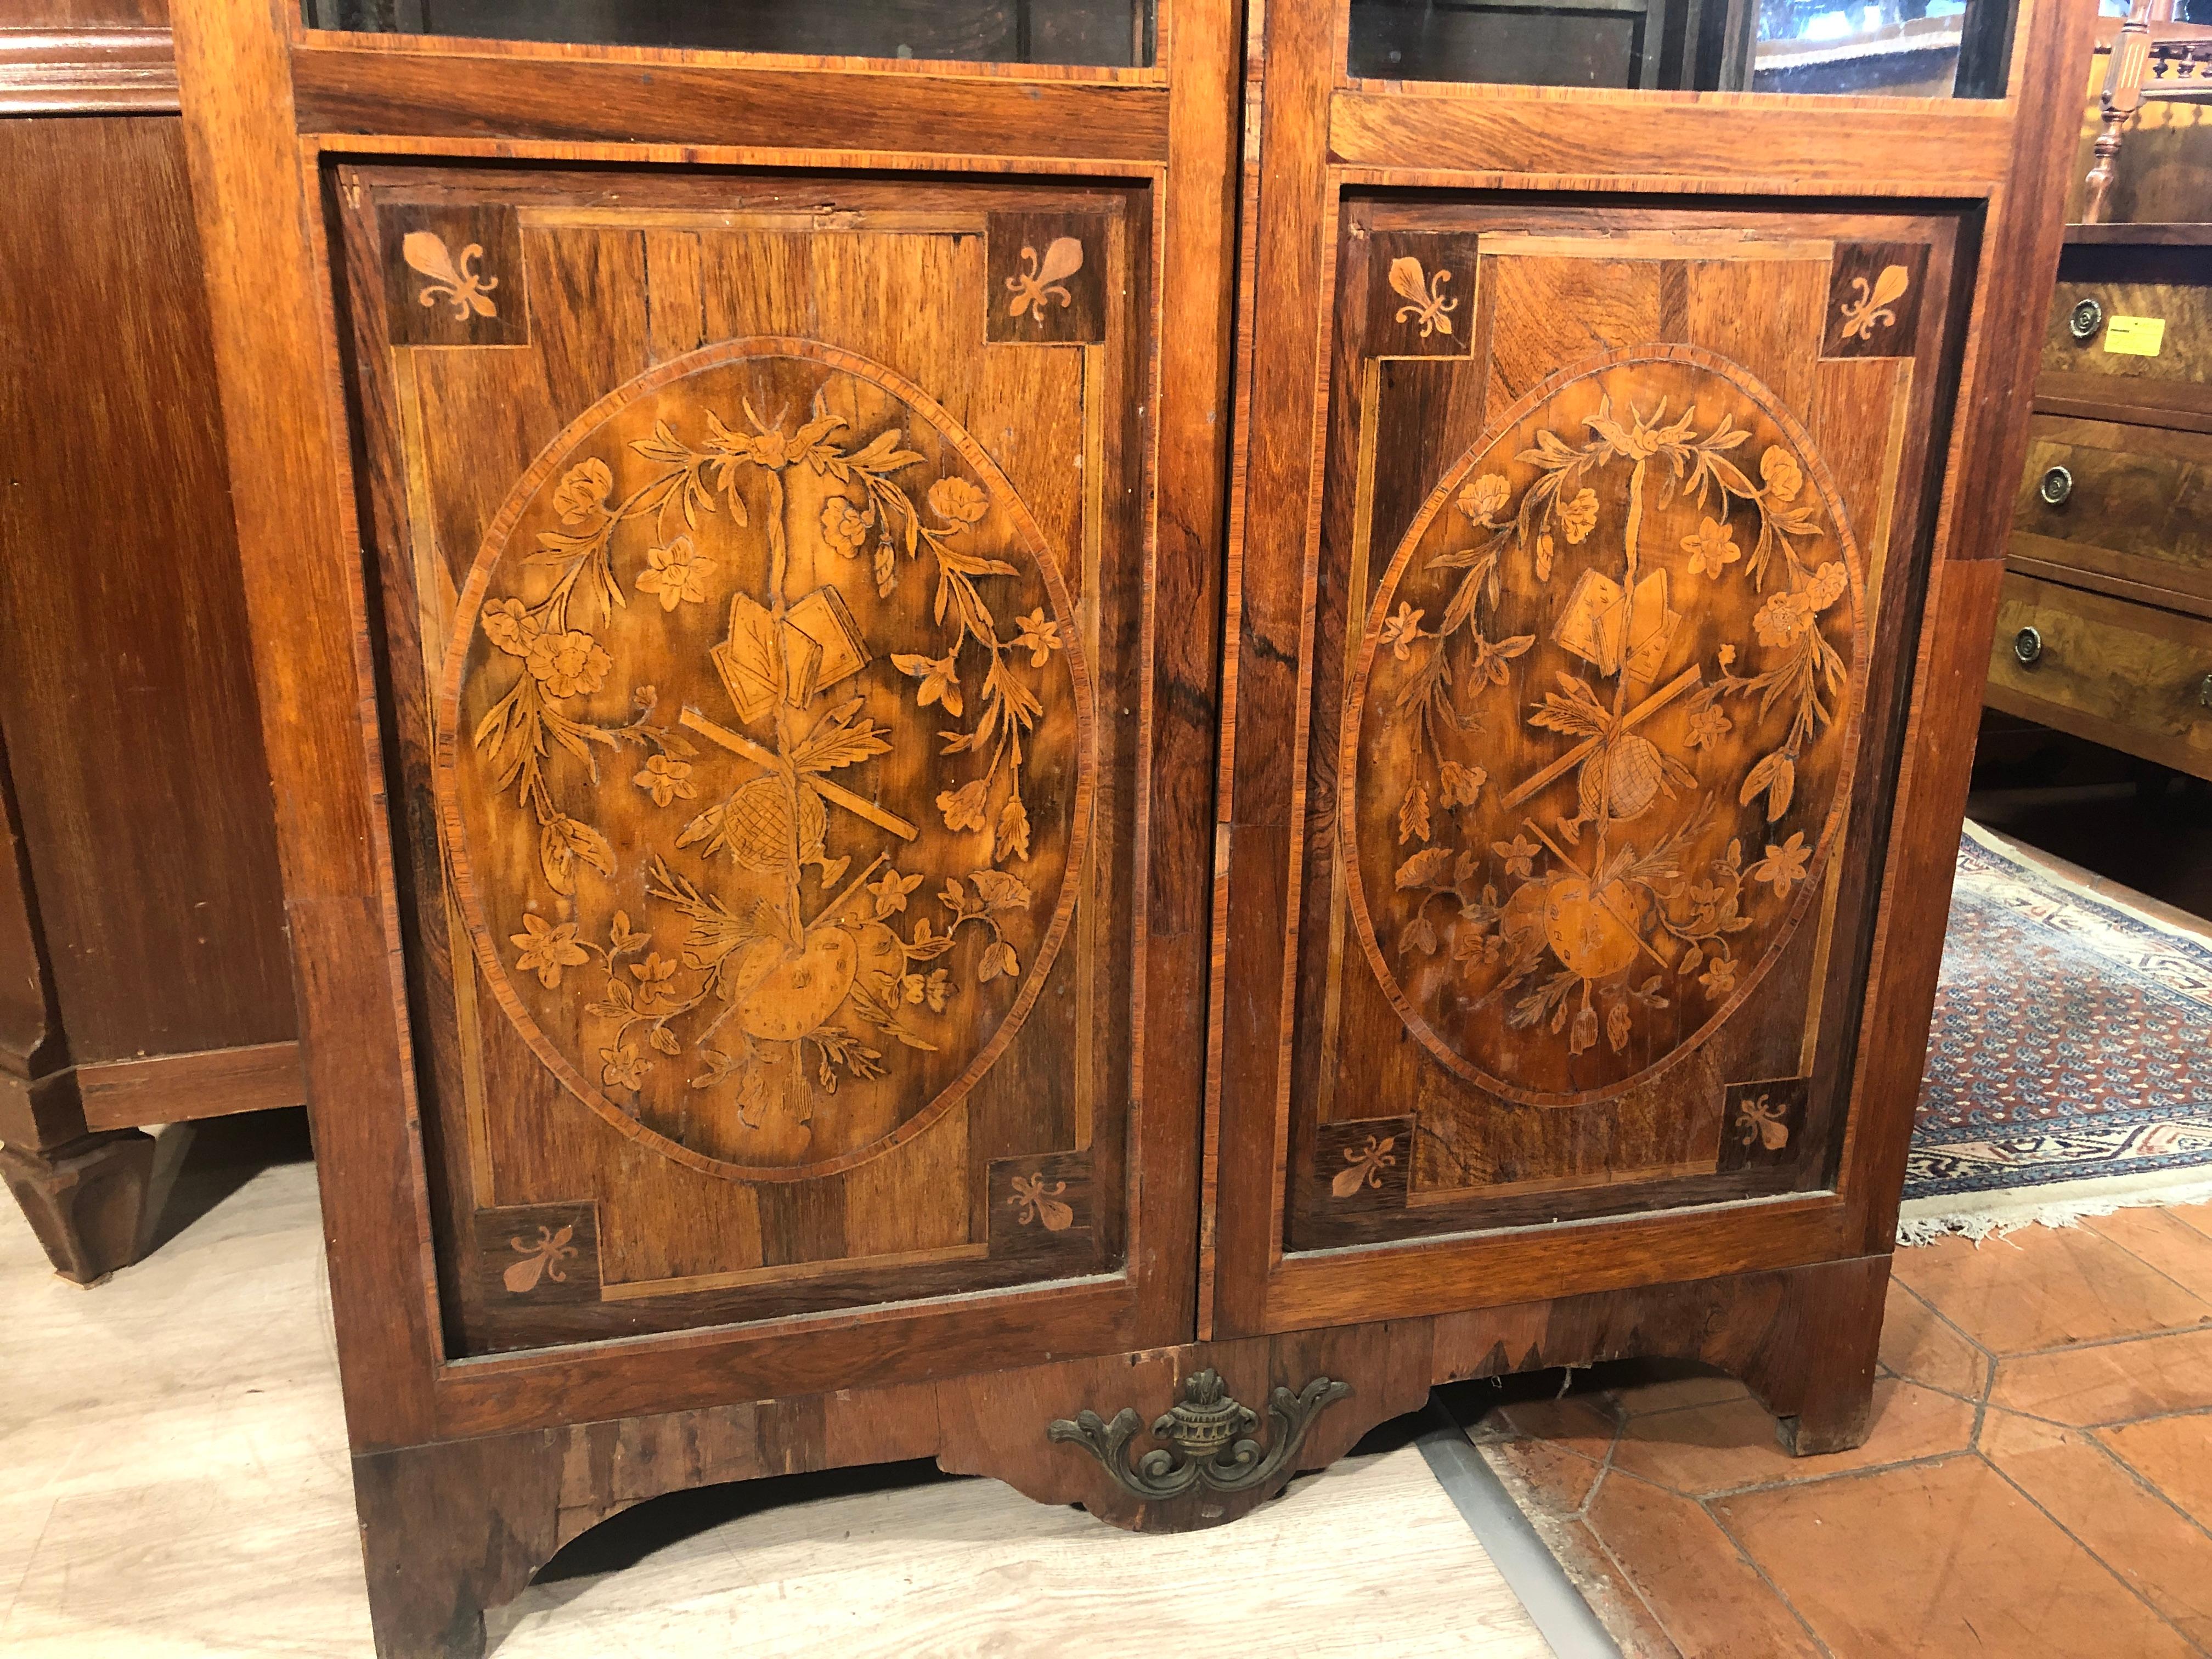 High-quality French cabinet, beautiful inlays on all surfaces depicting floral motifs, last period of Louis XVI, in rosewood and walnut. Two doors, high shelves are plated with rosewood, those hidden by inlaid panels are rough. Non-original lock in